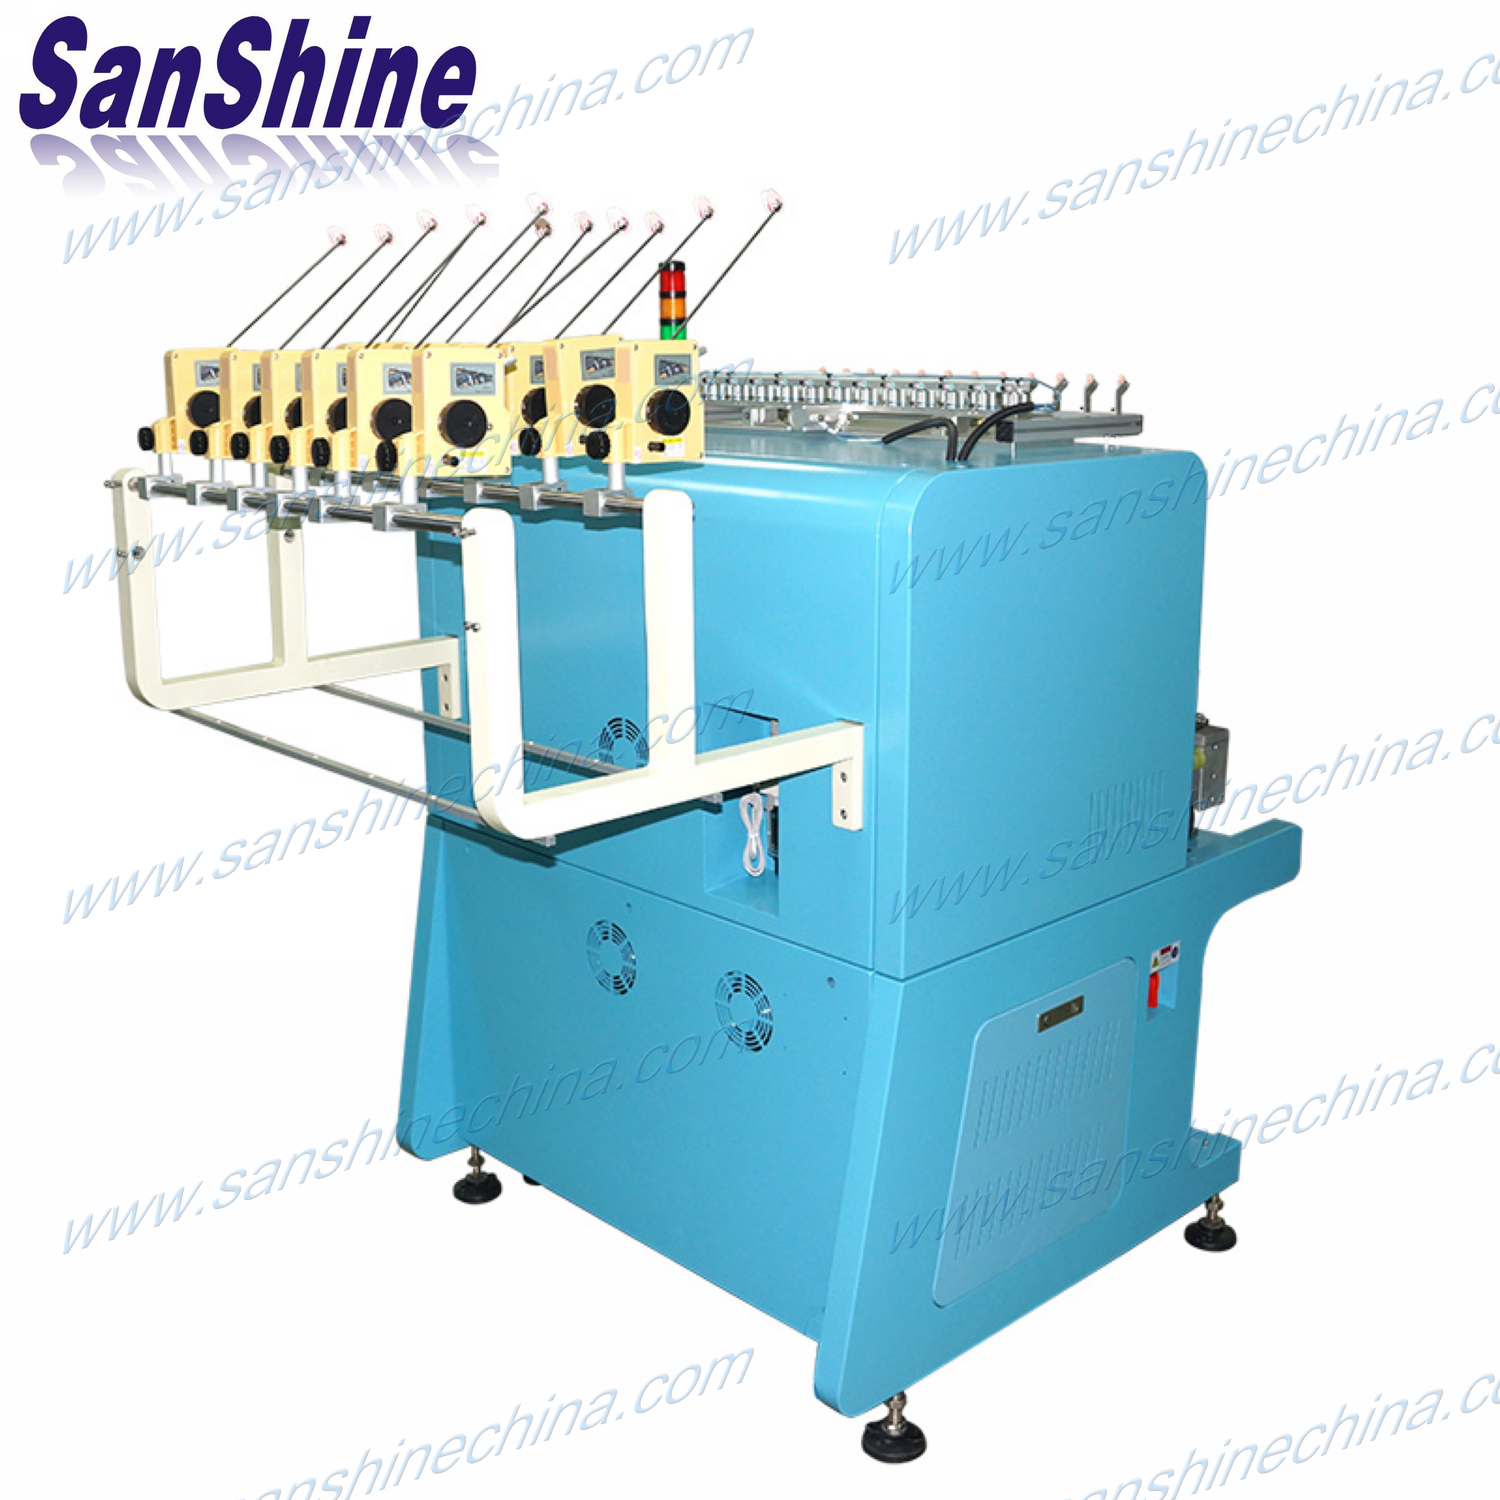 Fully automatic multi-spindles linear coil winding machine